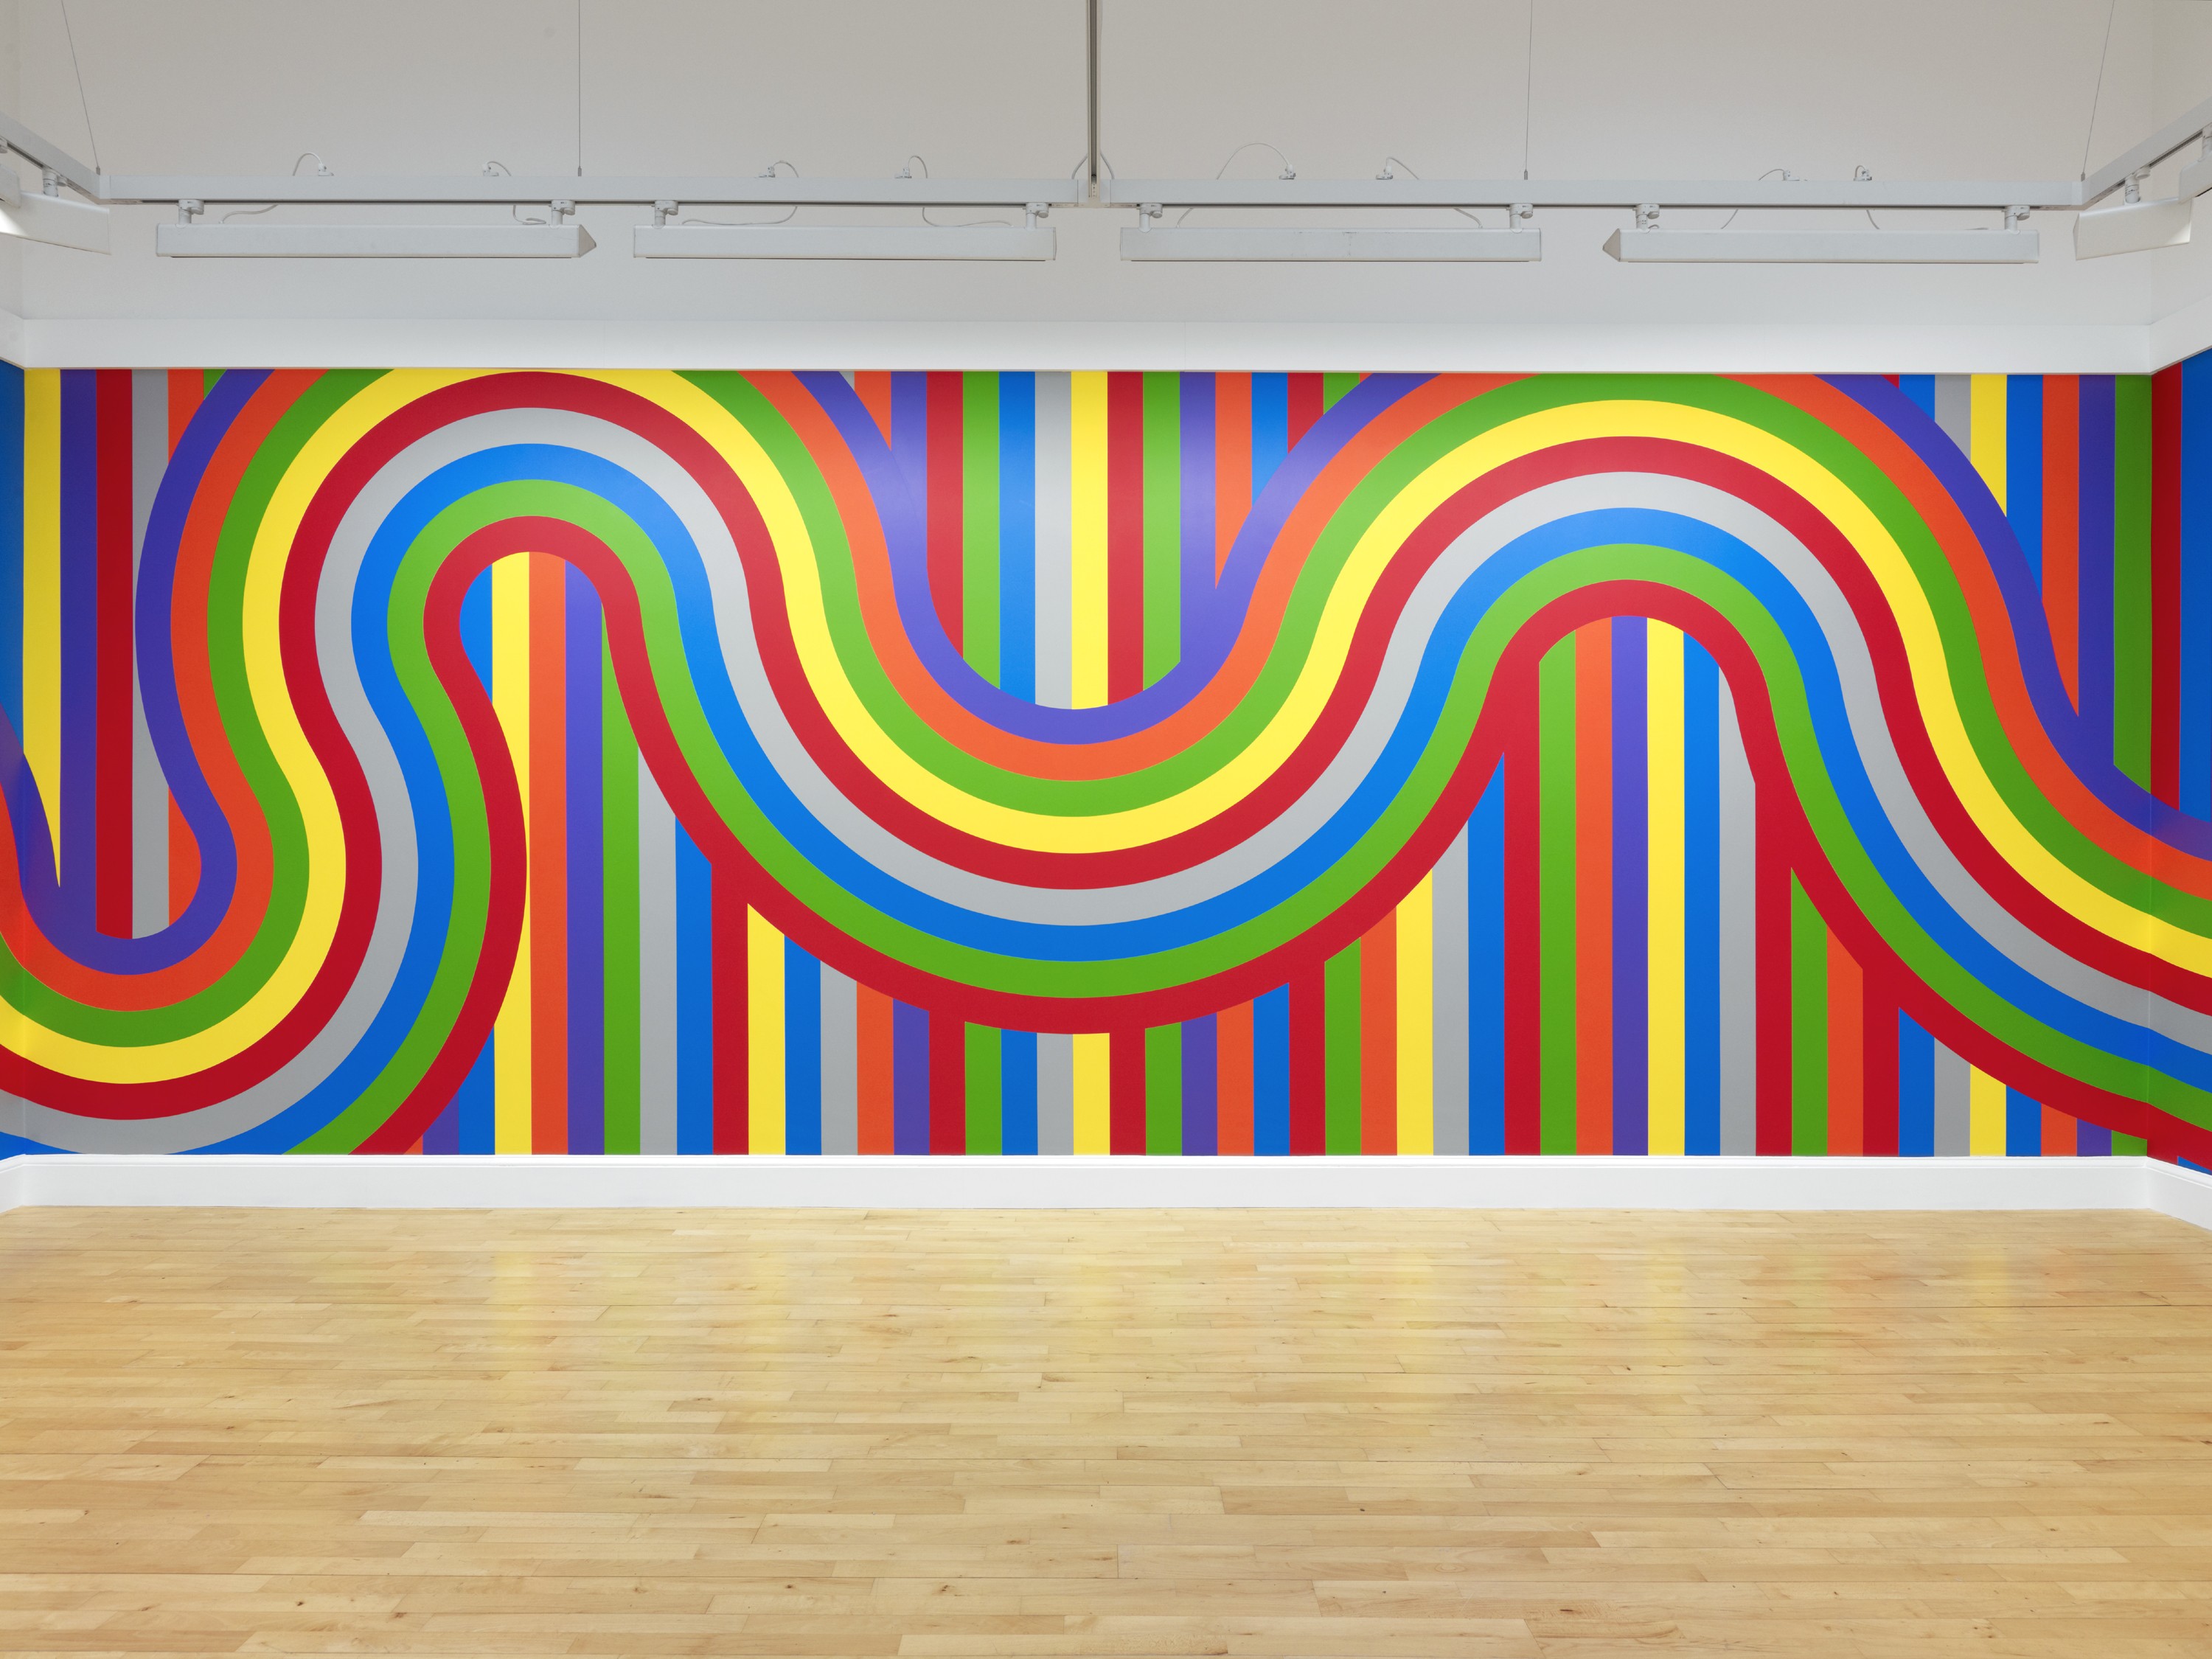 http://publicdelivery.org/wp-content/uploads/2013/07/sol-lewitt-wall-drawing-11361.jpg